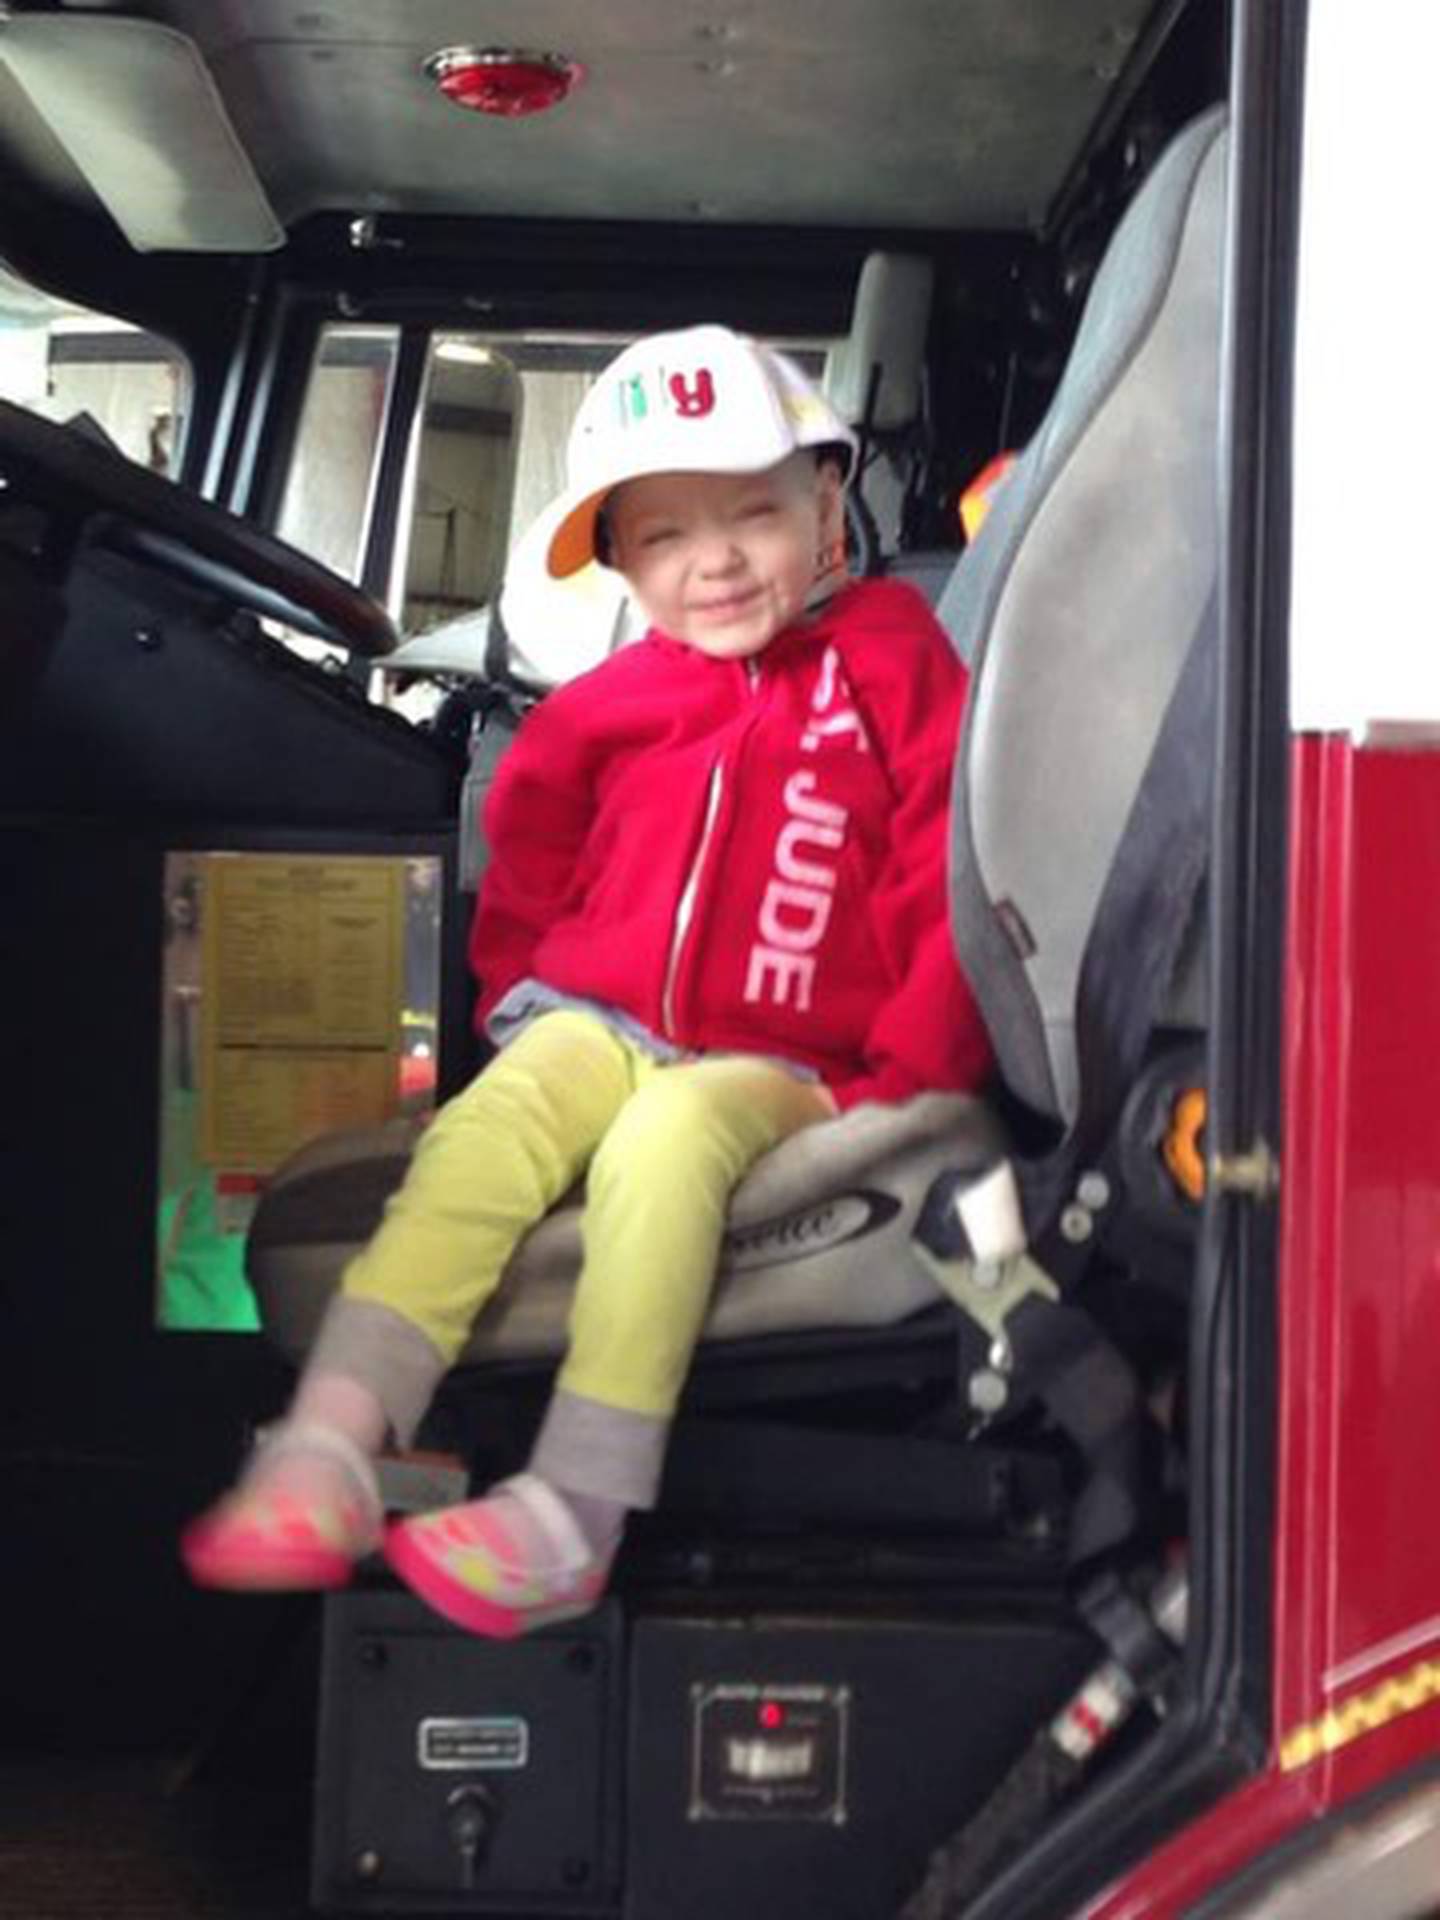 Lily Rosploch, who passed away in 2015 at age 5, always loved riding fire trucks.